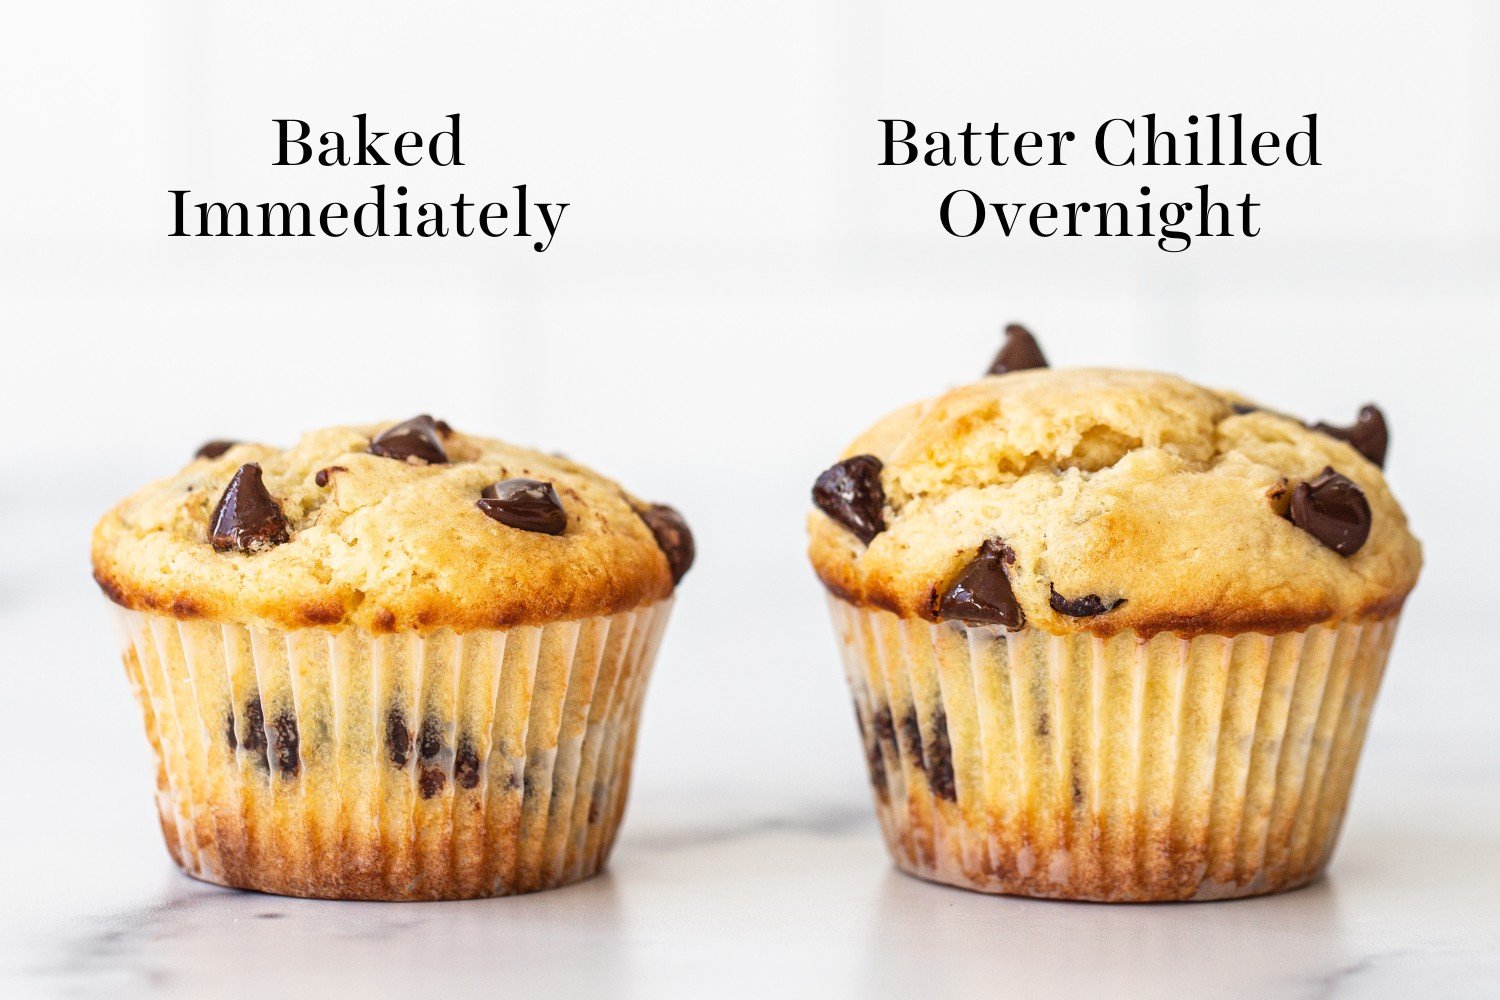 two side-by-side muffins - one where the batter was made and it was baked immediately, and the other taller muffin, where the batter was chilled overnight and then baked the following day.